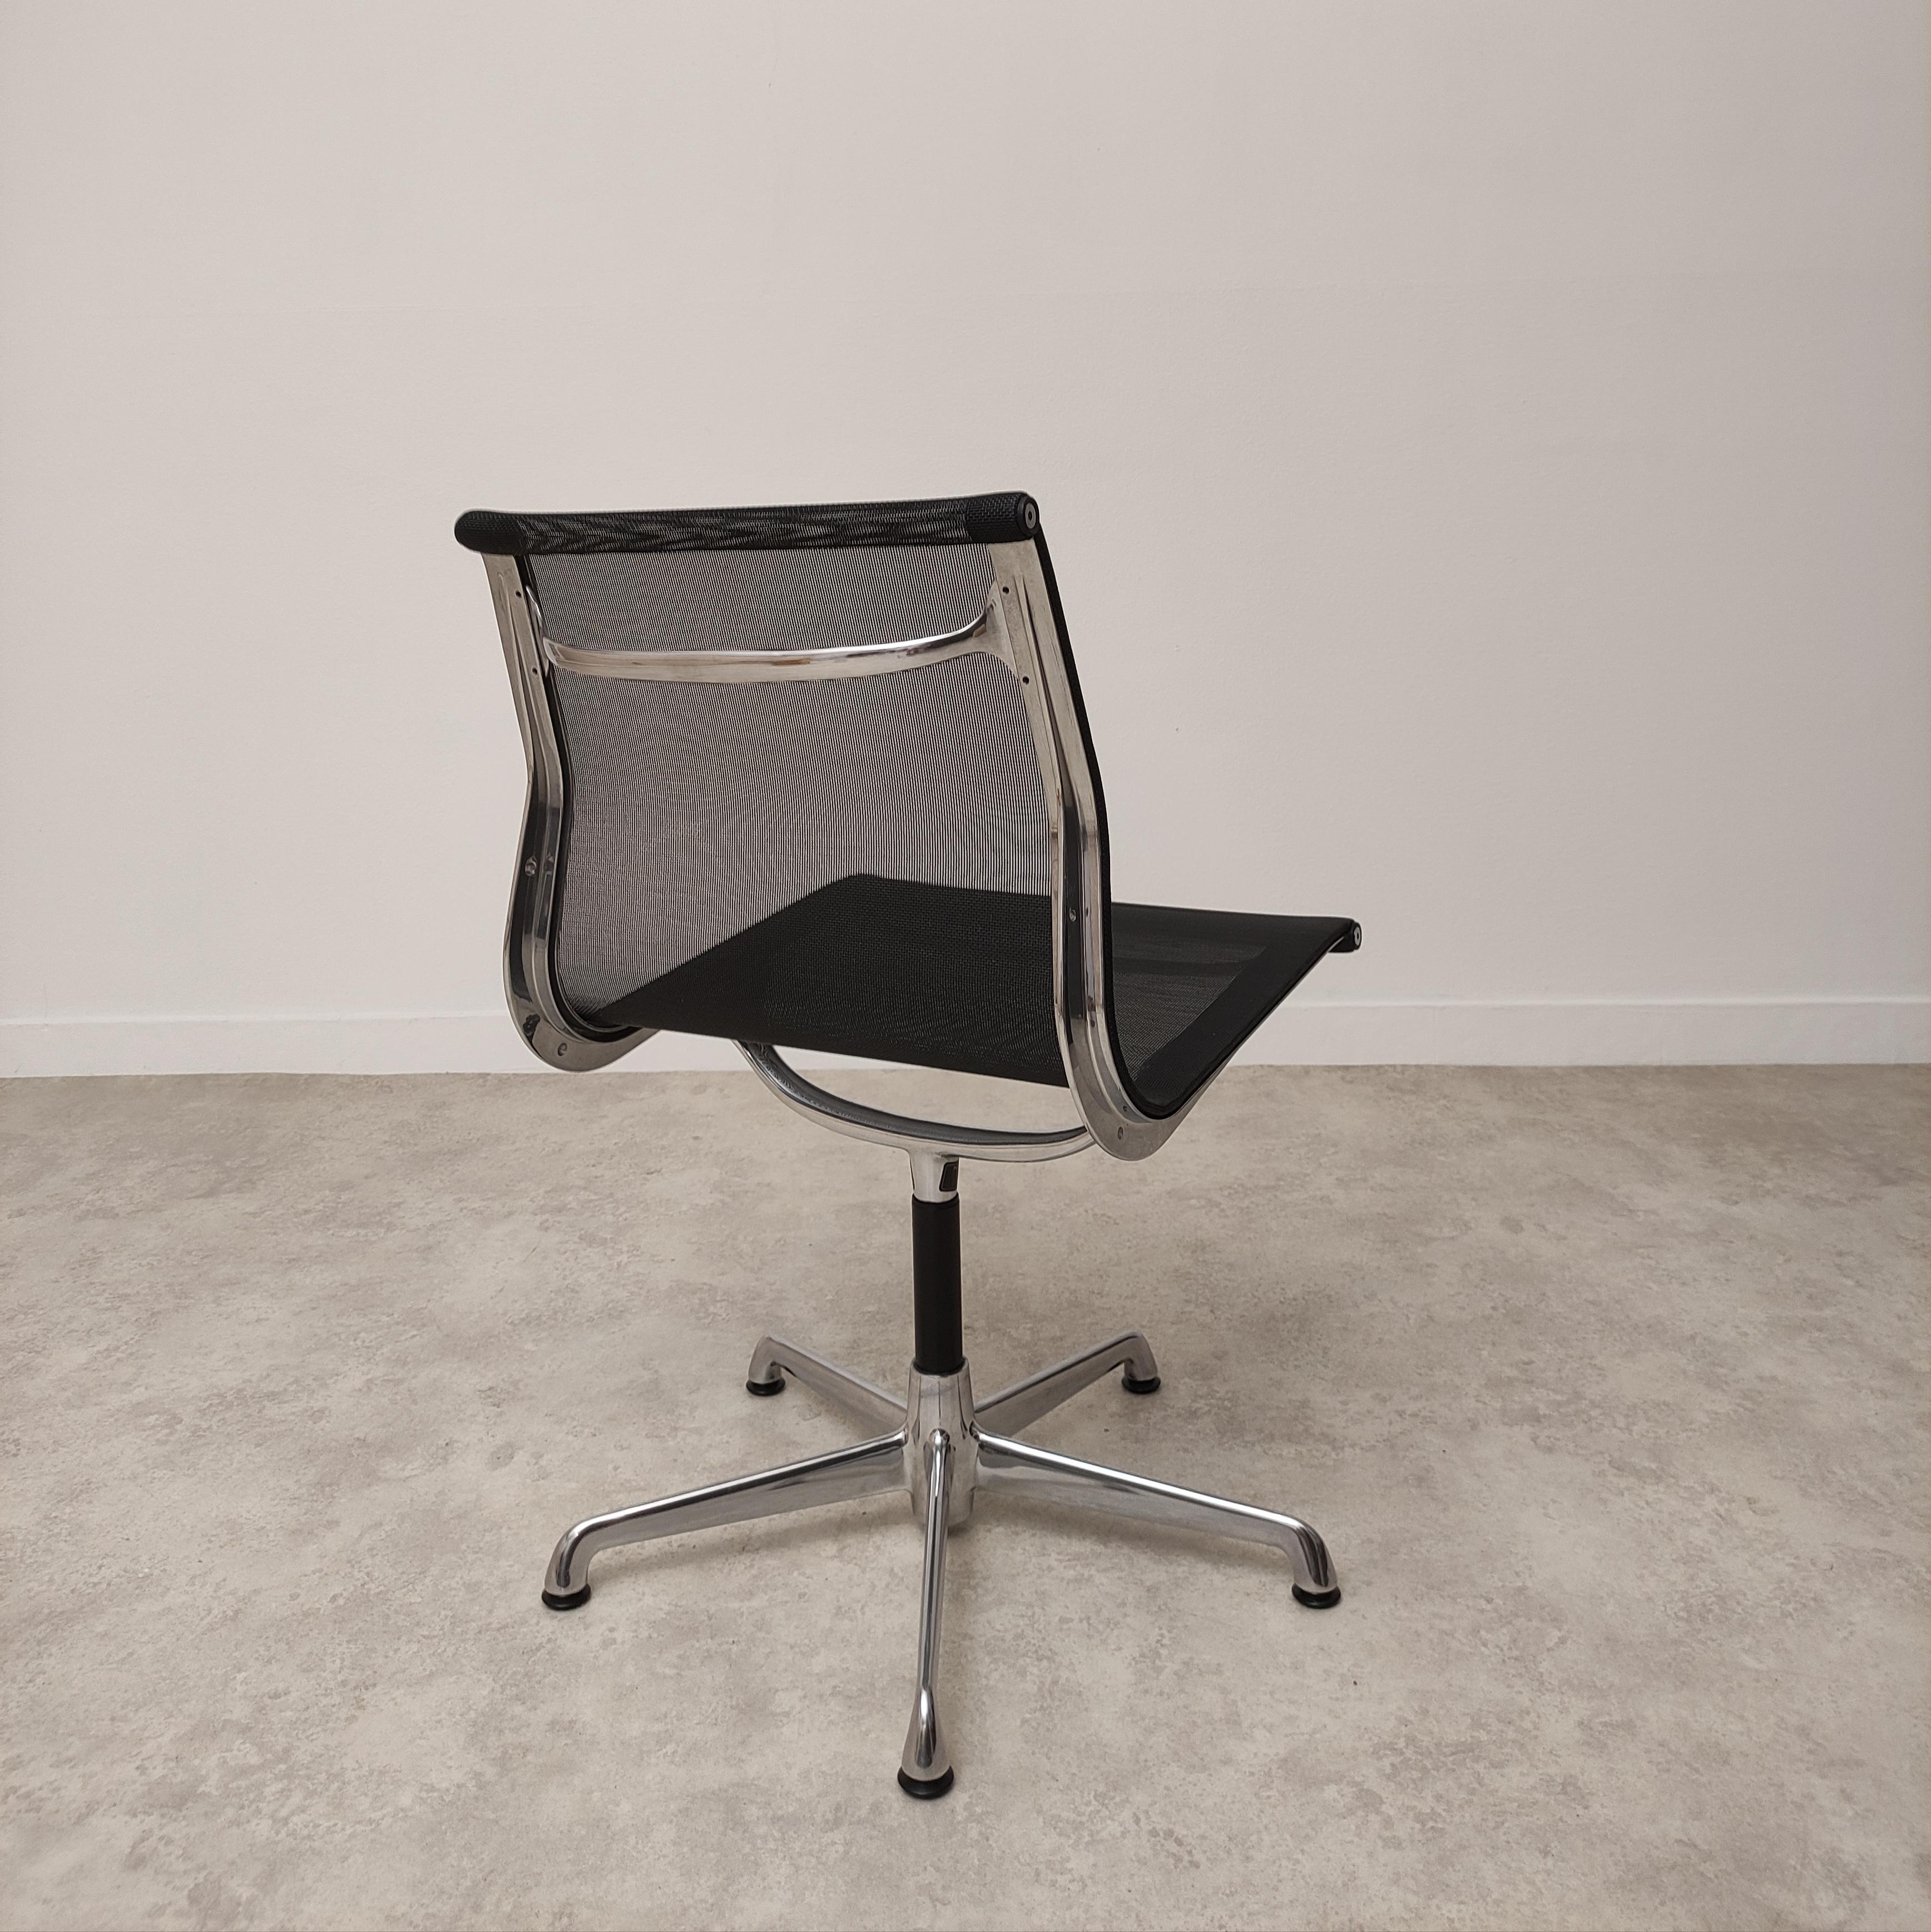 Amazing Ea107 desk chair design by Charles eames.
This early ICF production Is the only One that have licensed by Hermann Miller group so details are perfect as the american model.
This chair Is in perfect condition, Chrome parts are perfect